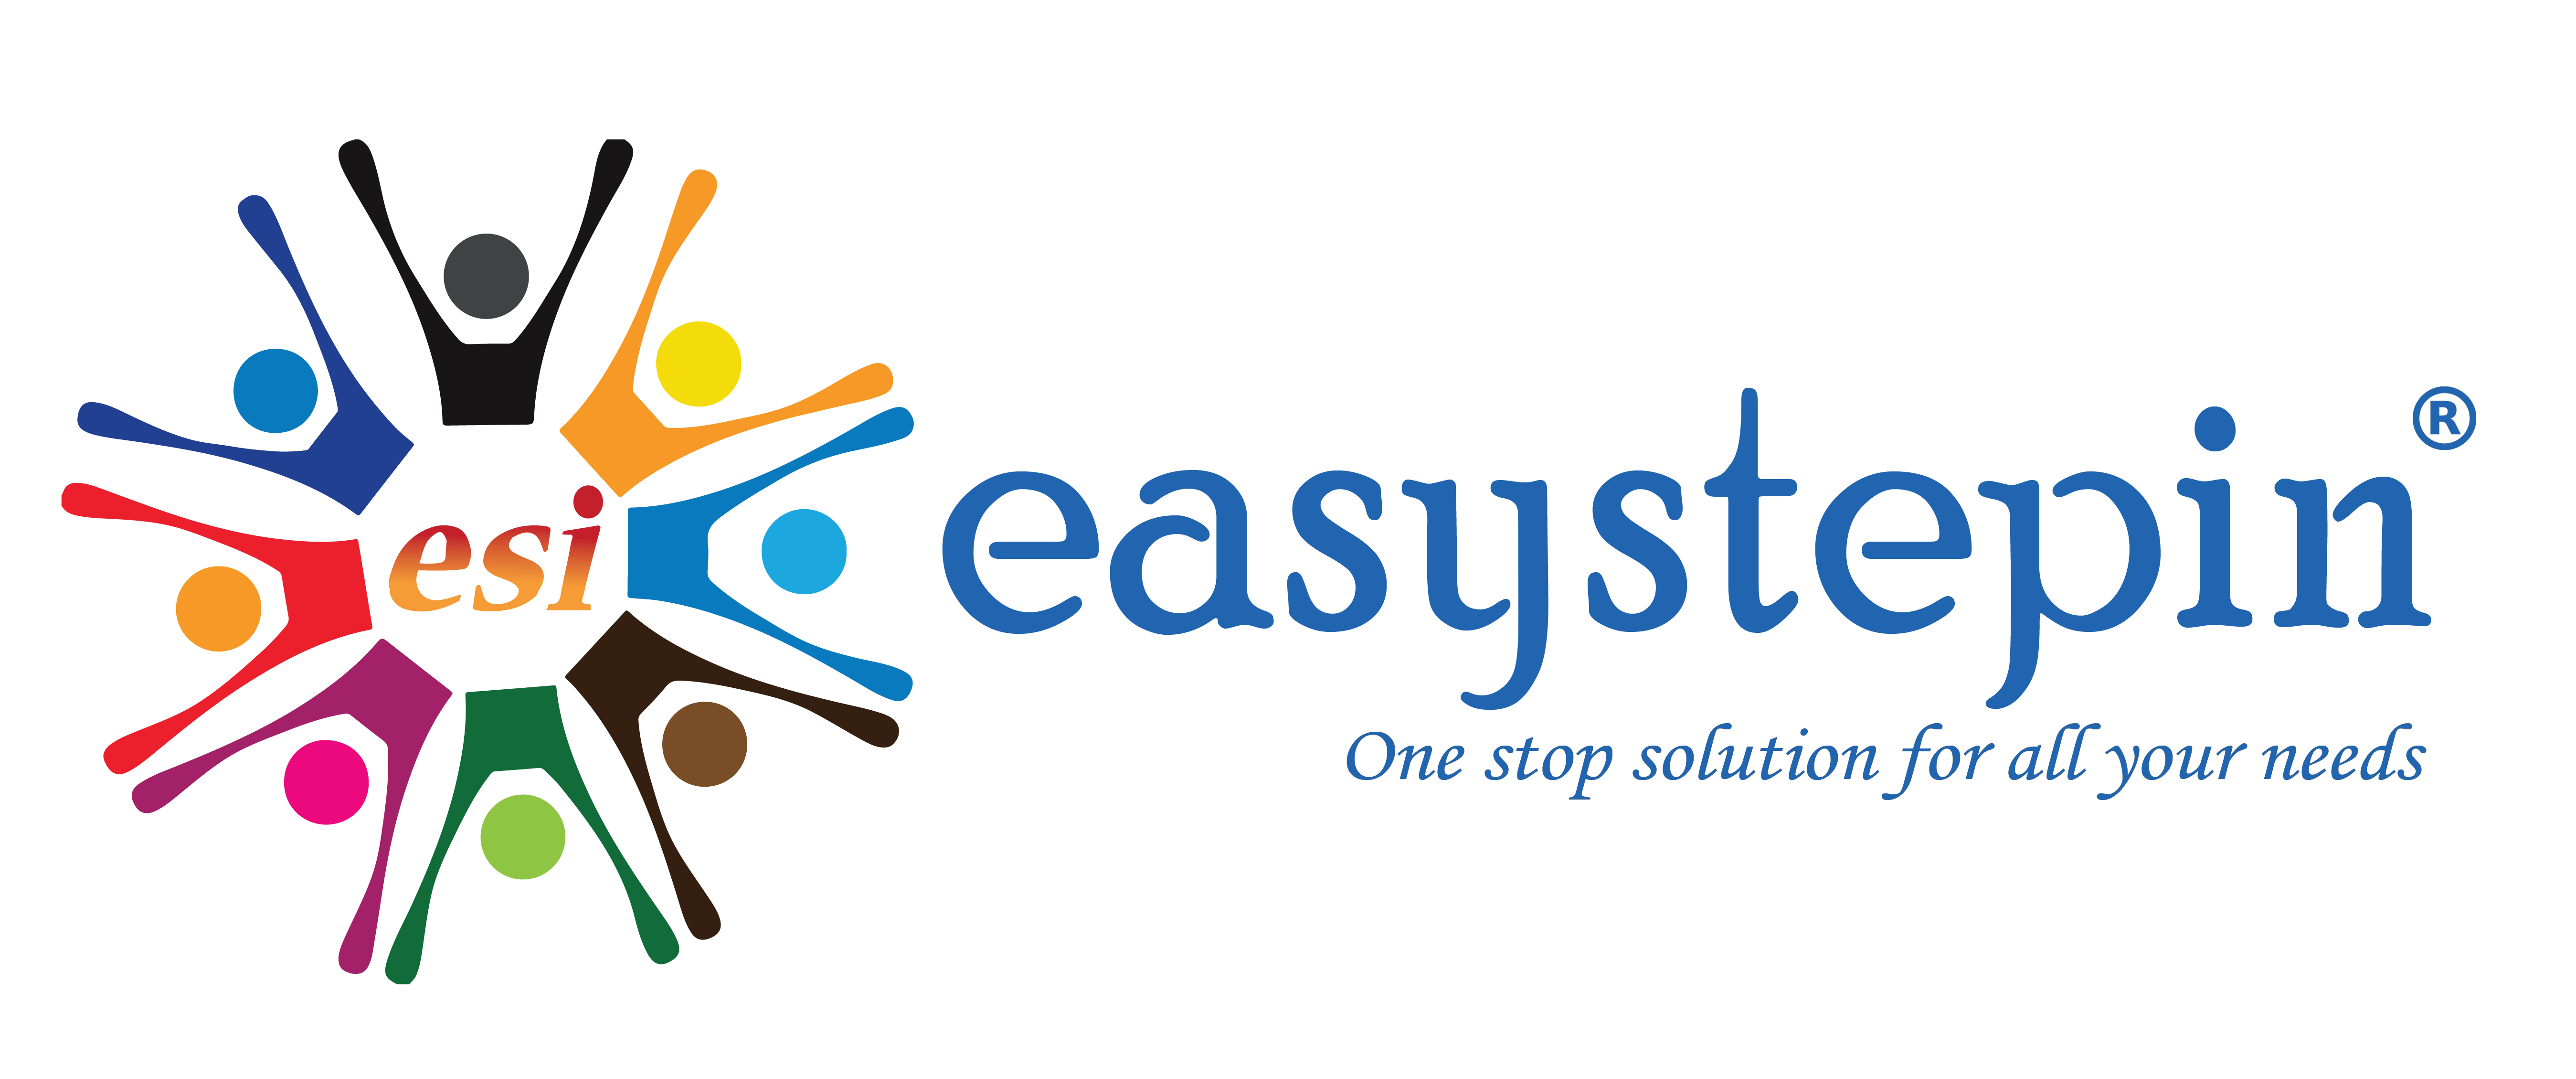 cropped-easystepin-01-blue-1.png